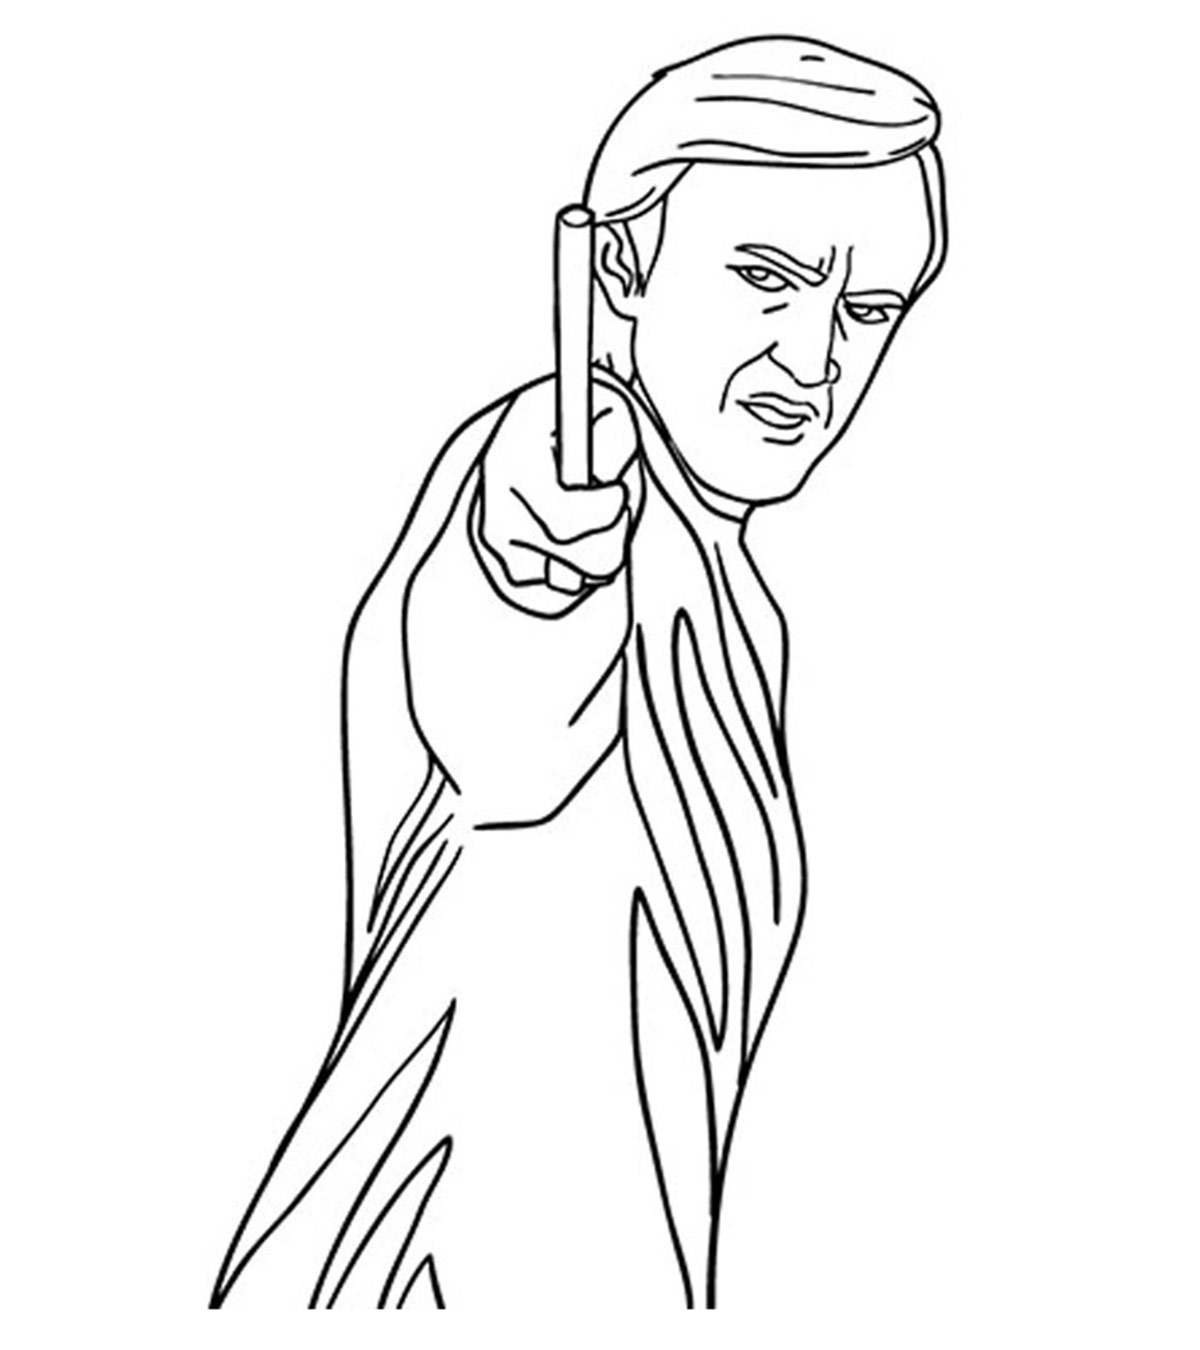 Top free printable harry potter coloring pages online